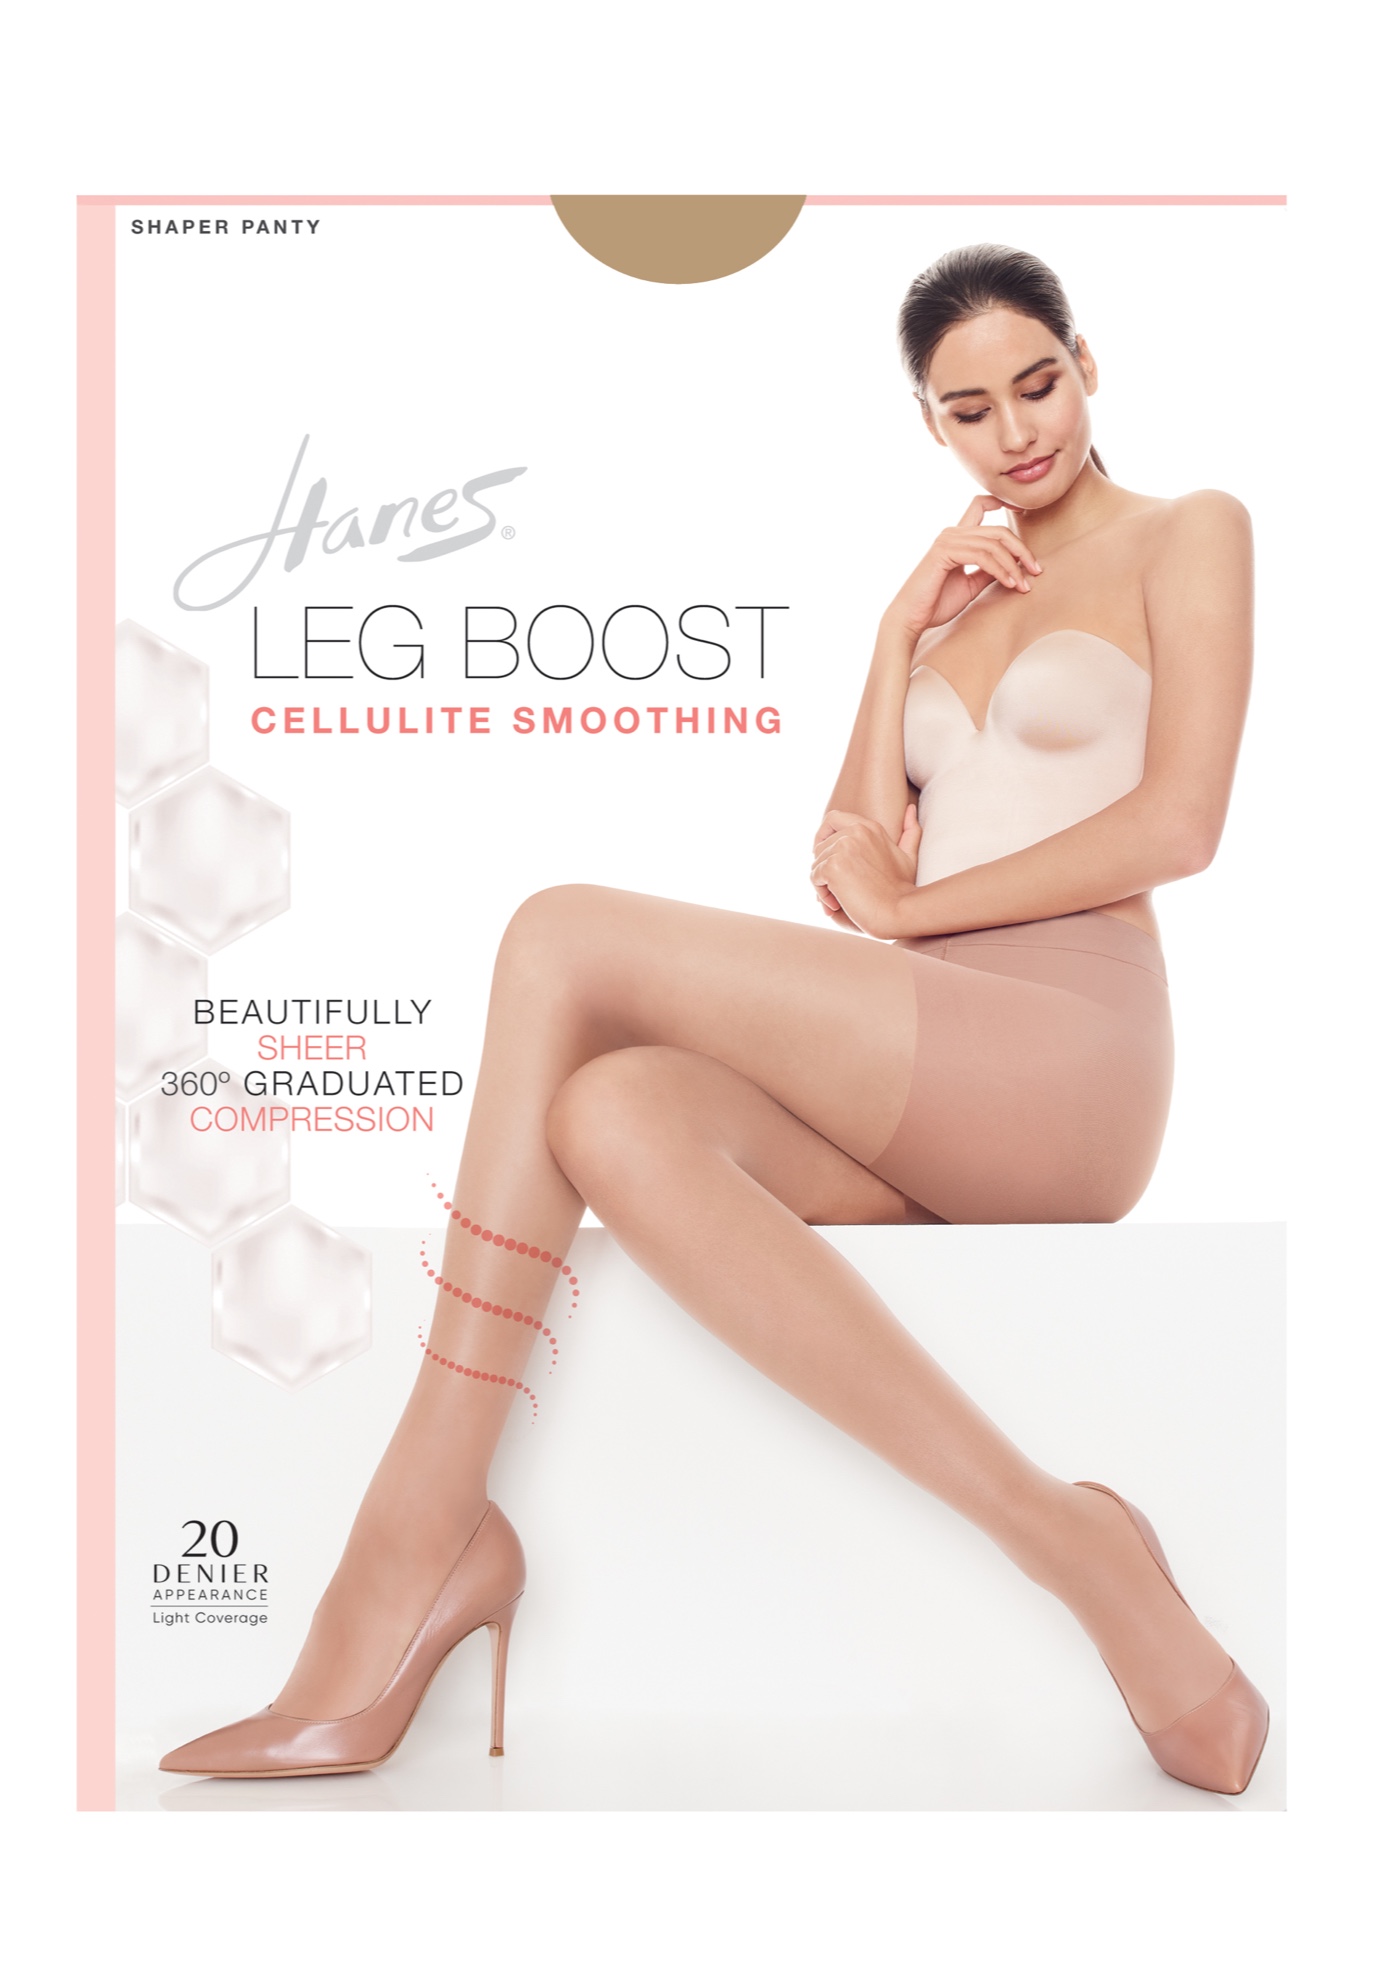 Silk Reflections Leg Boost Cellulite Smoothing Hosiery, 